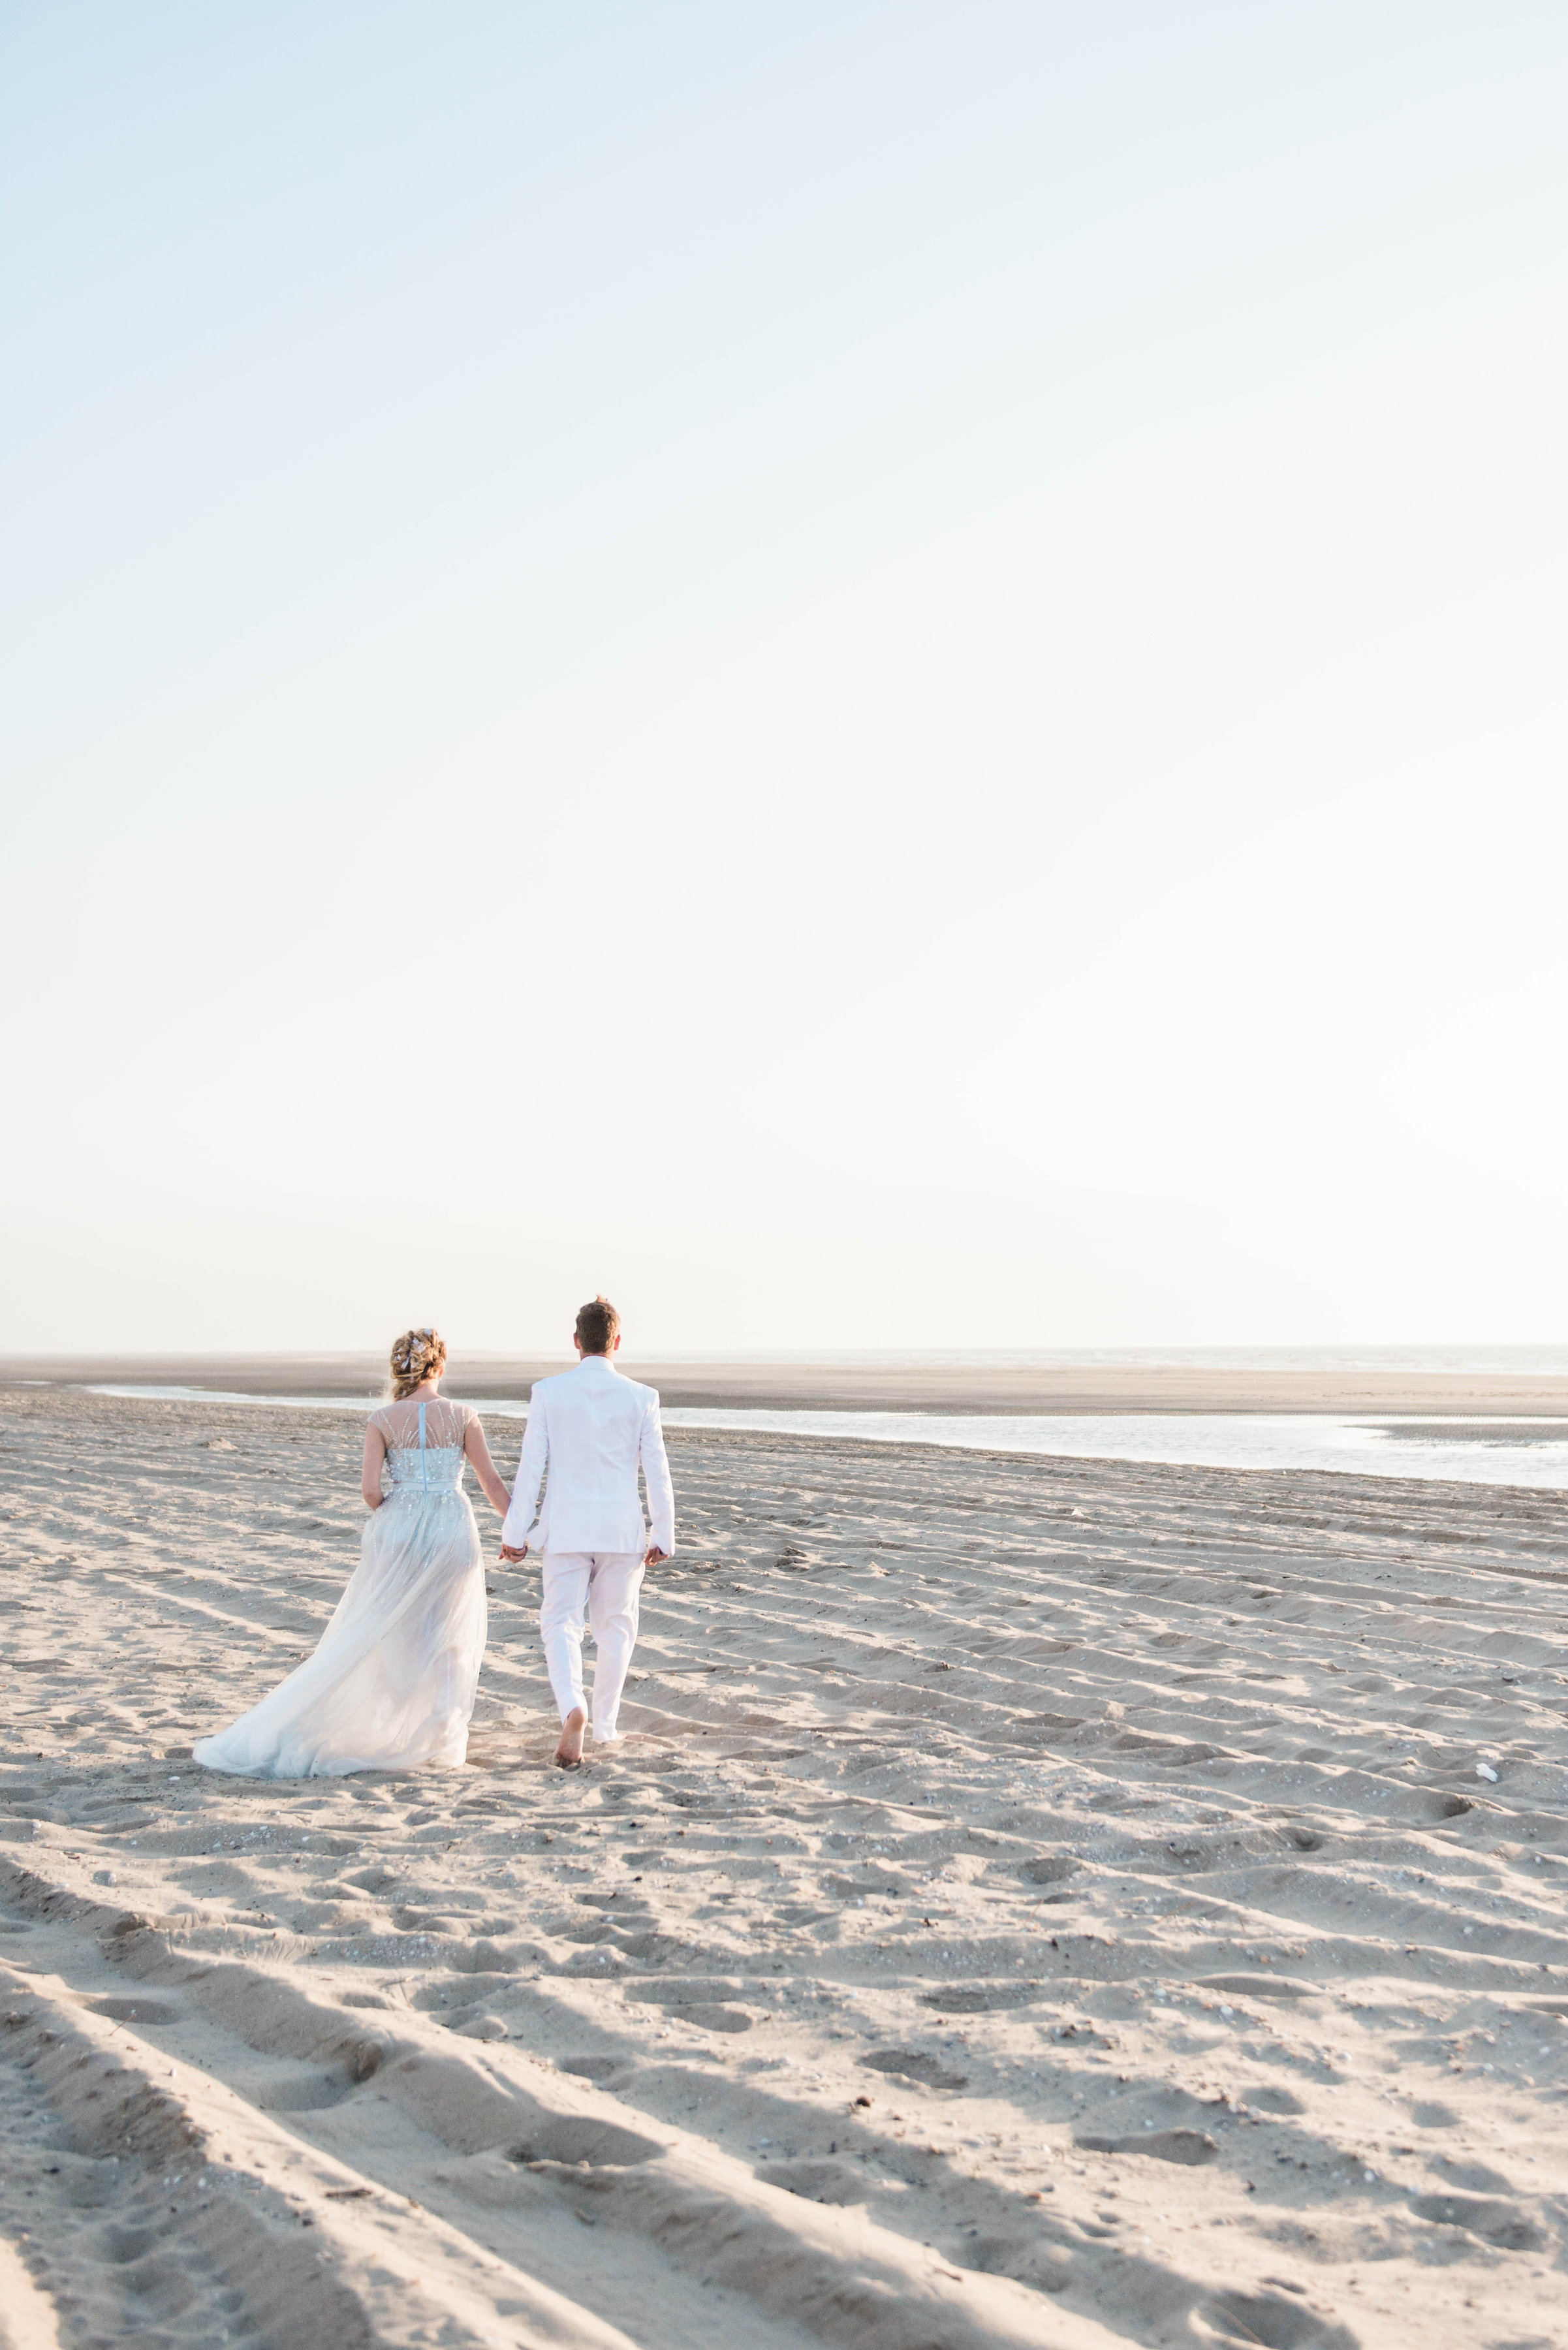 Elopement photography in the netehrlands